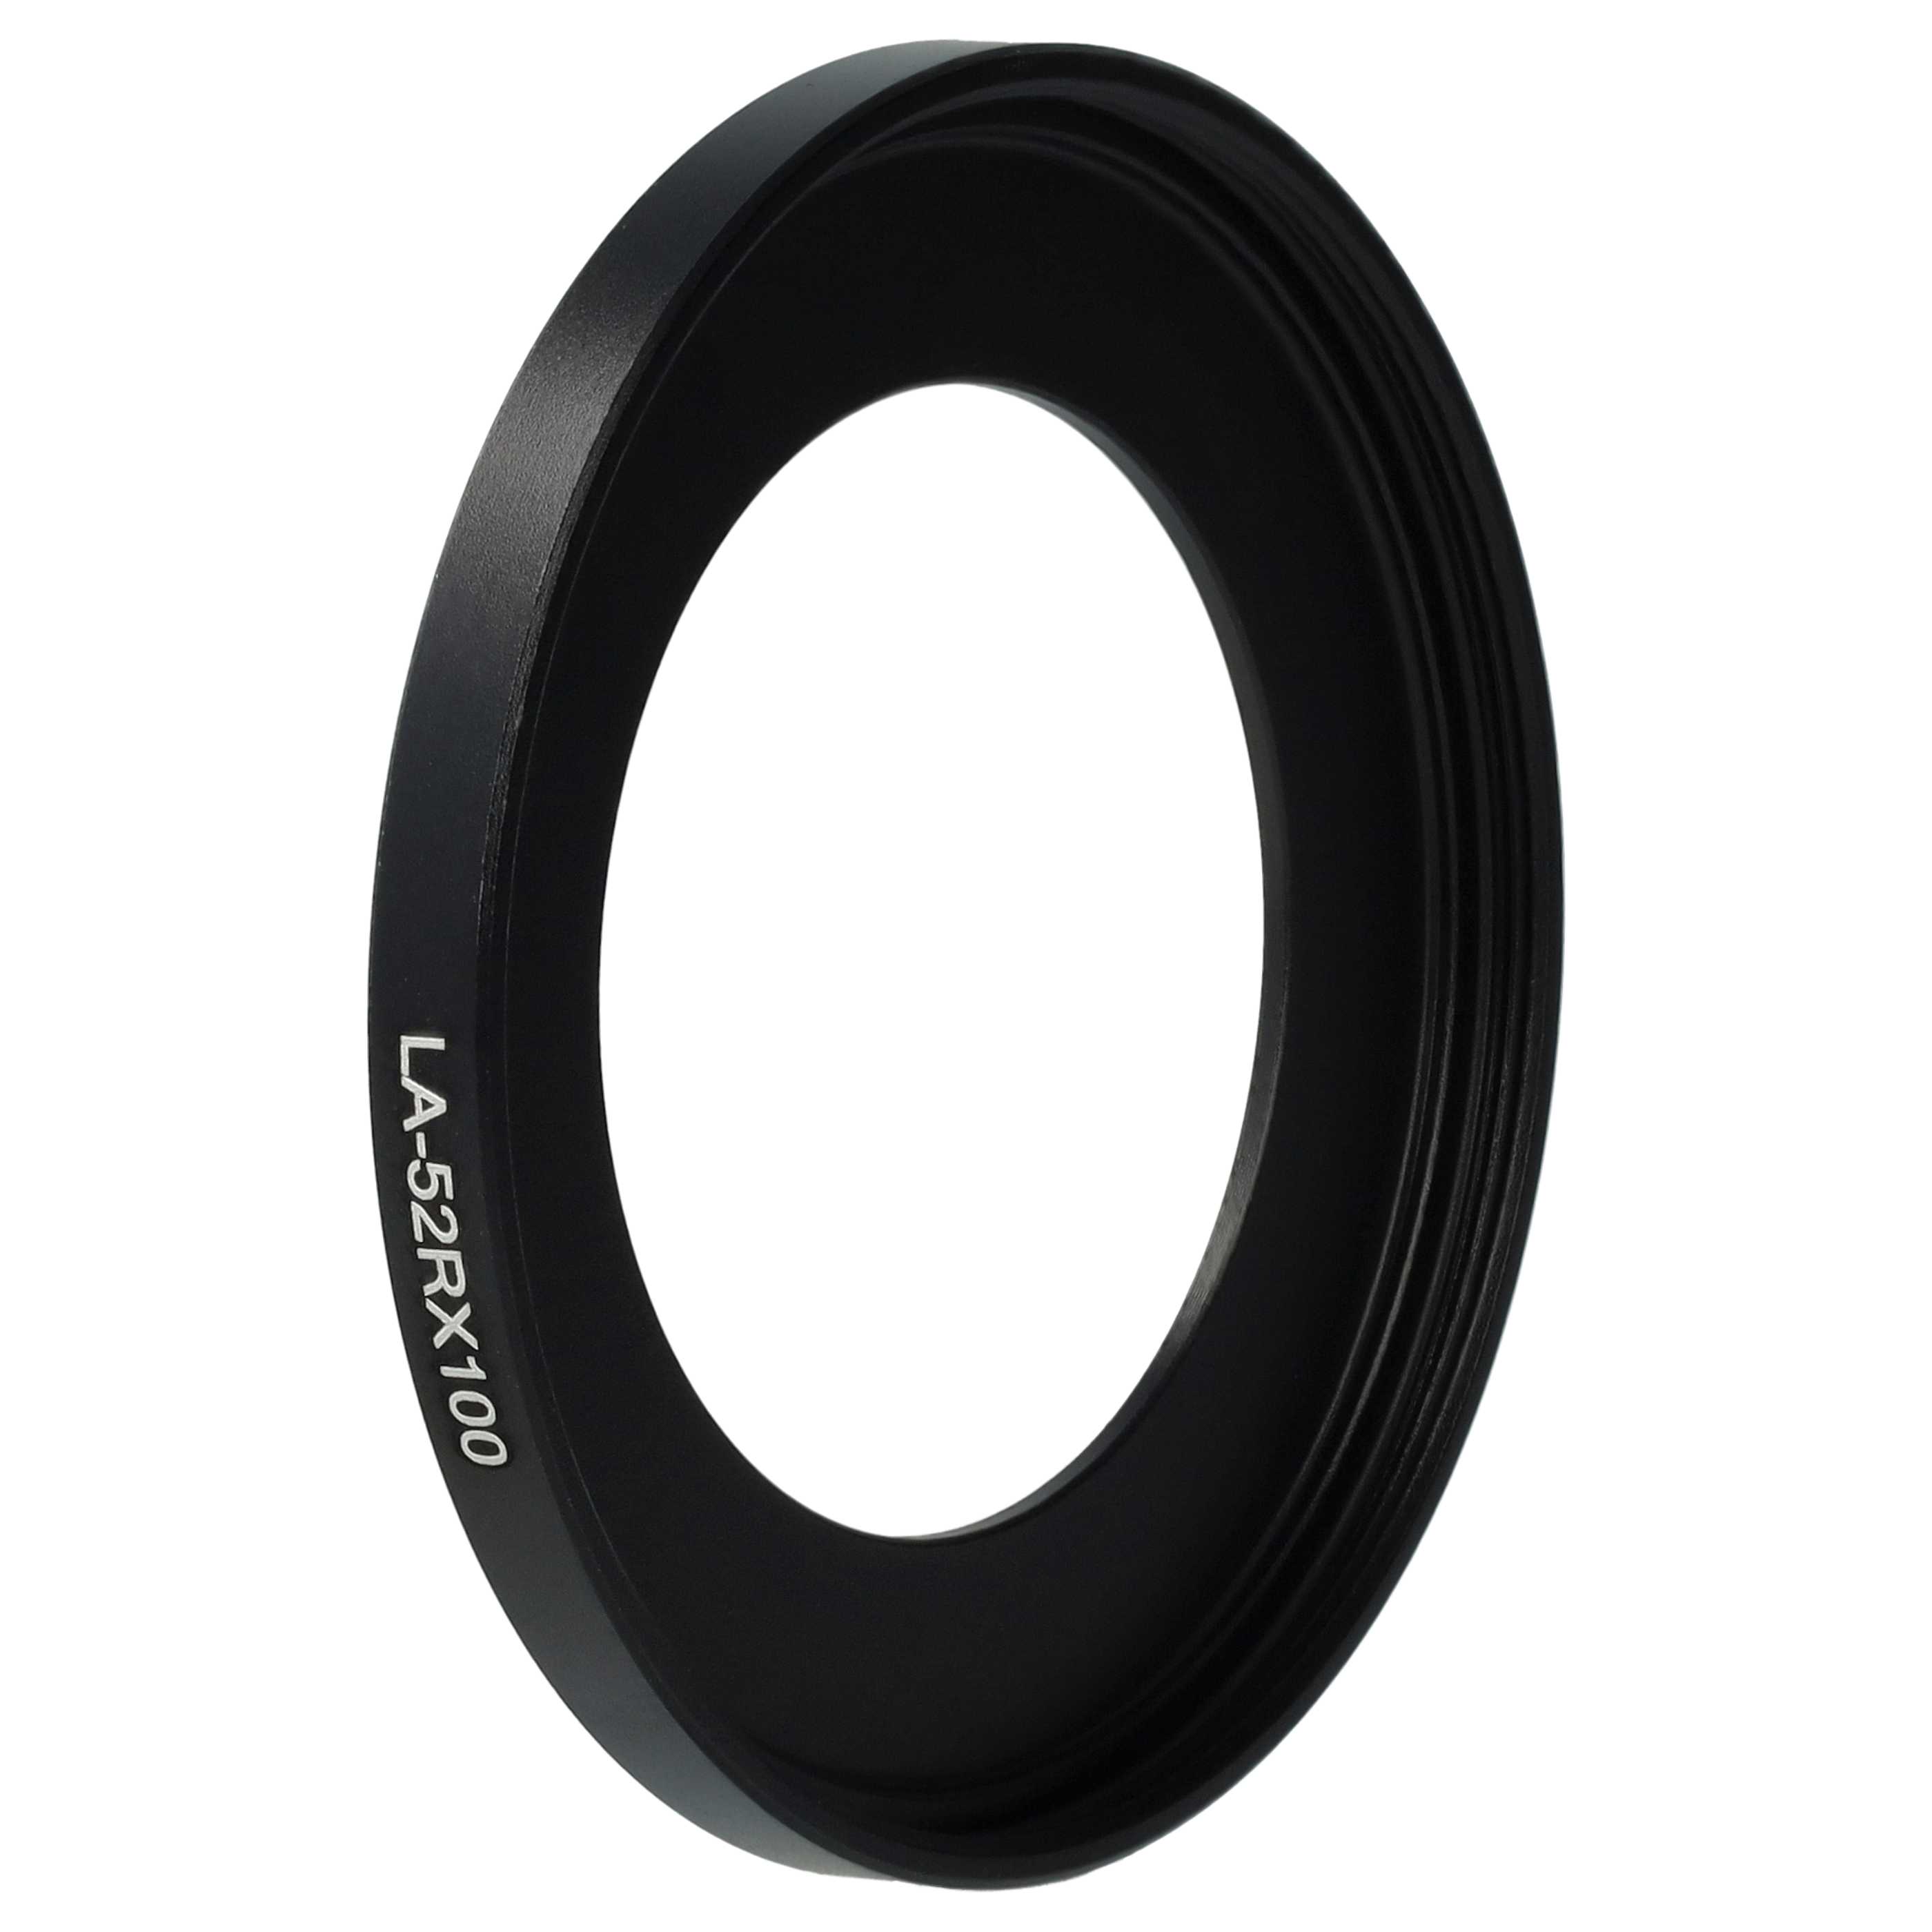 52 mm Filter Adapter replaces Sony LA-52RX100 for Camera Lens